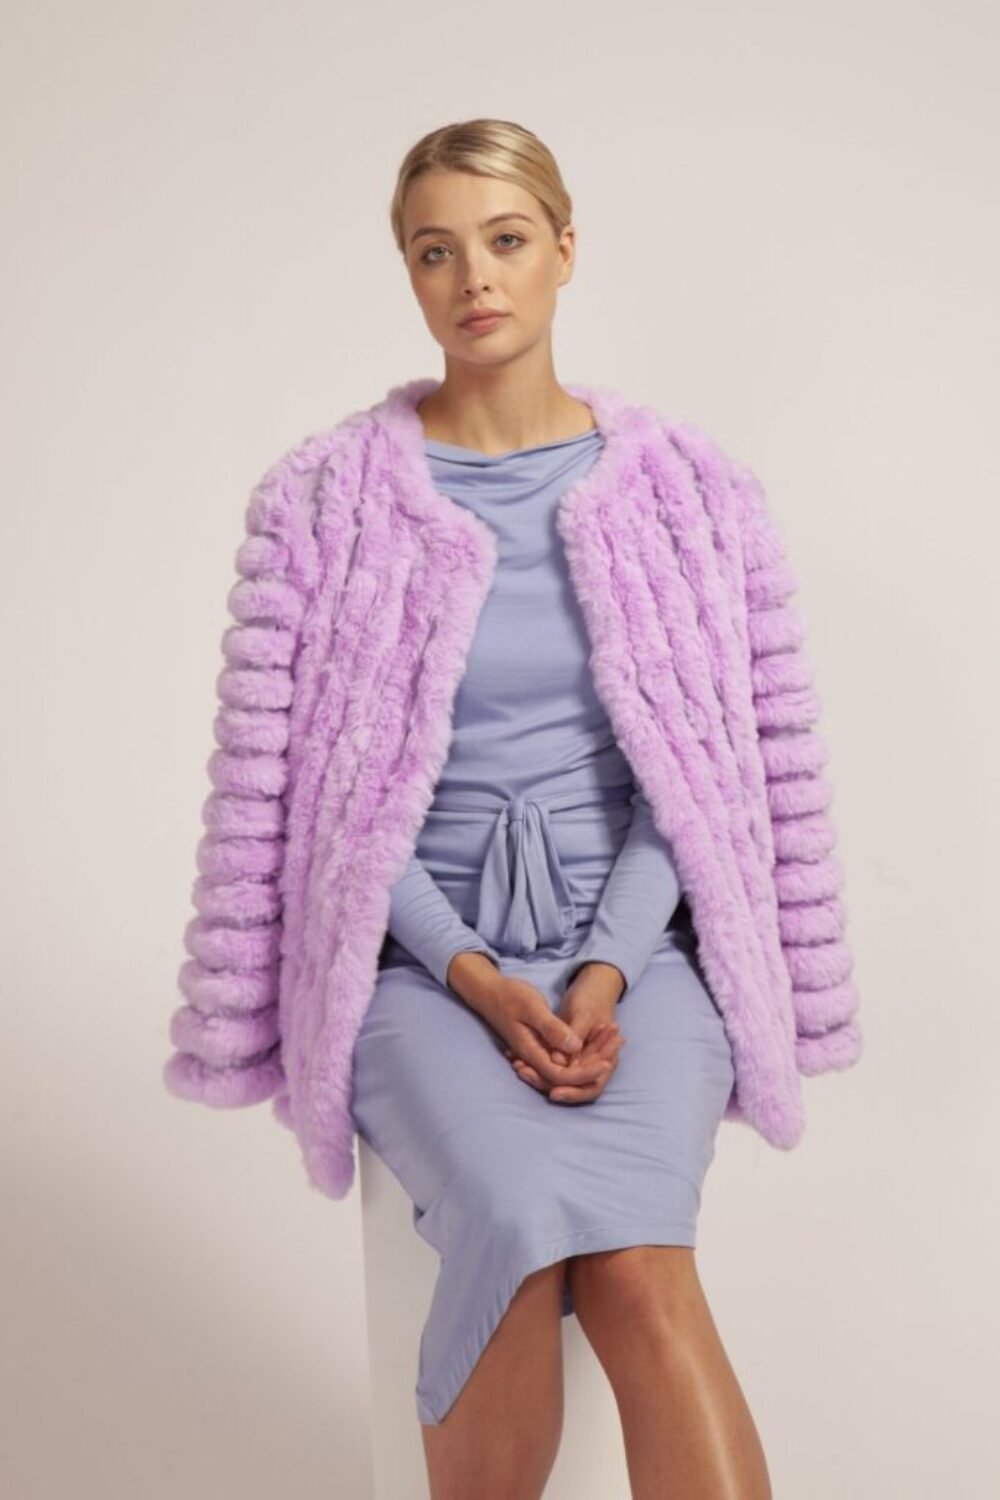 Shop Lux Purple Faux Fur Faux Suede Coat and women's luxury and designer clothes at www.lux-apparel.co.uk